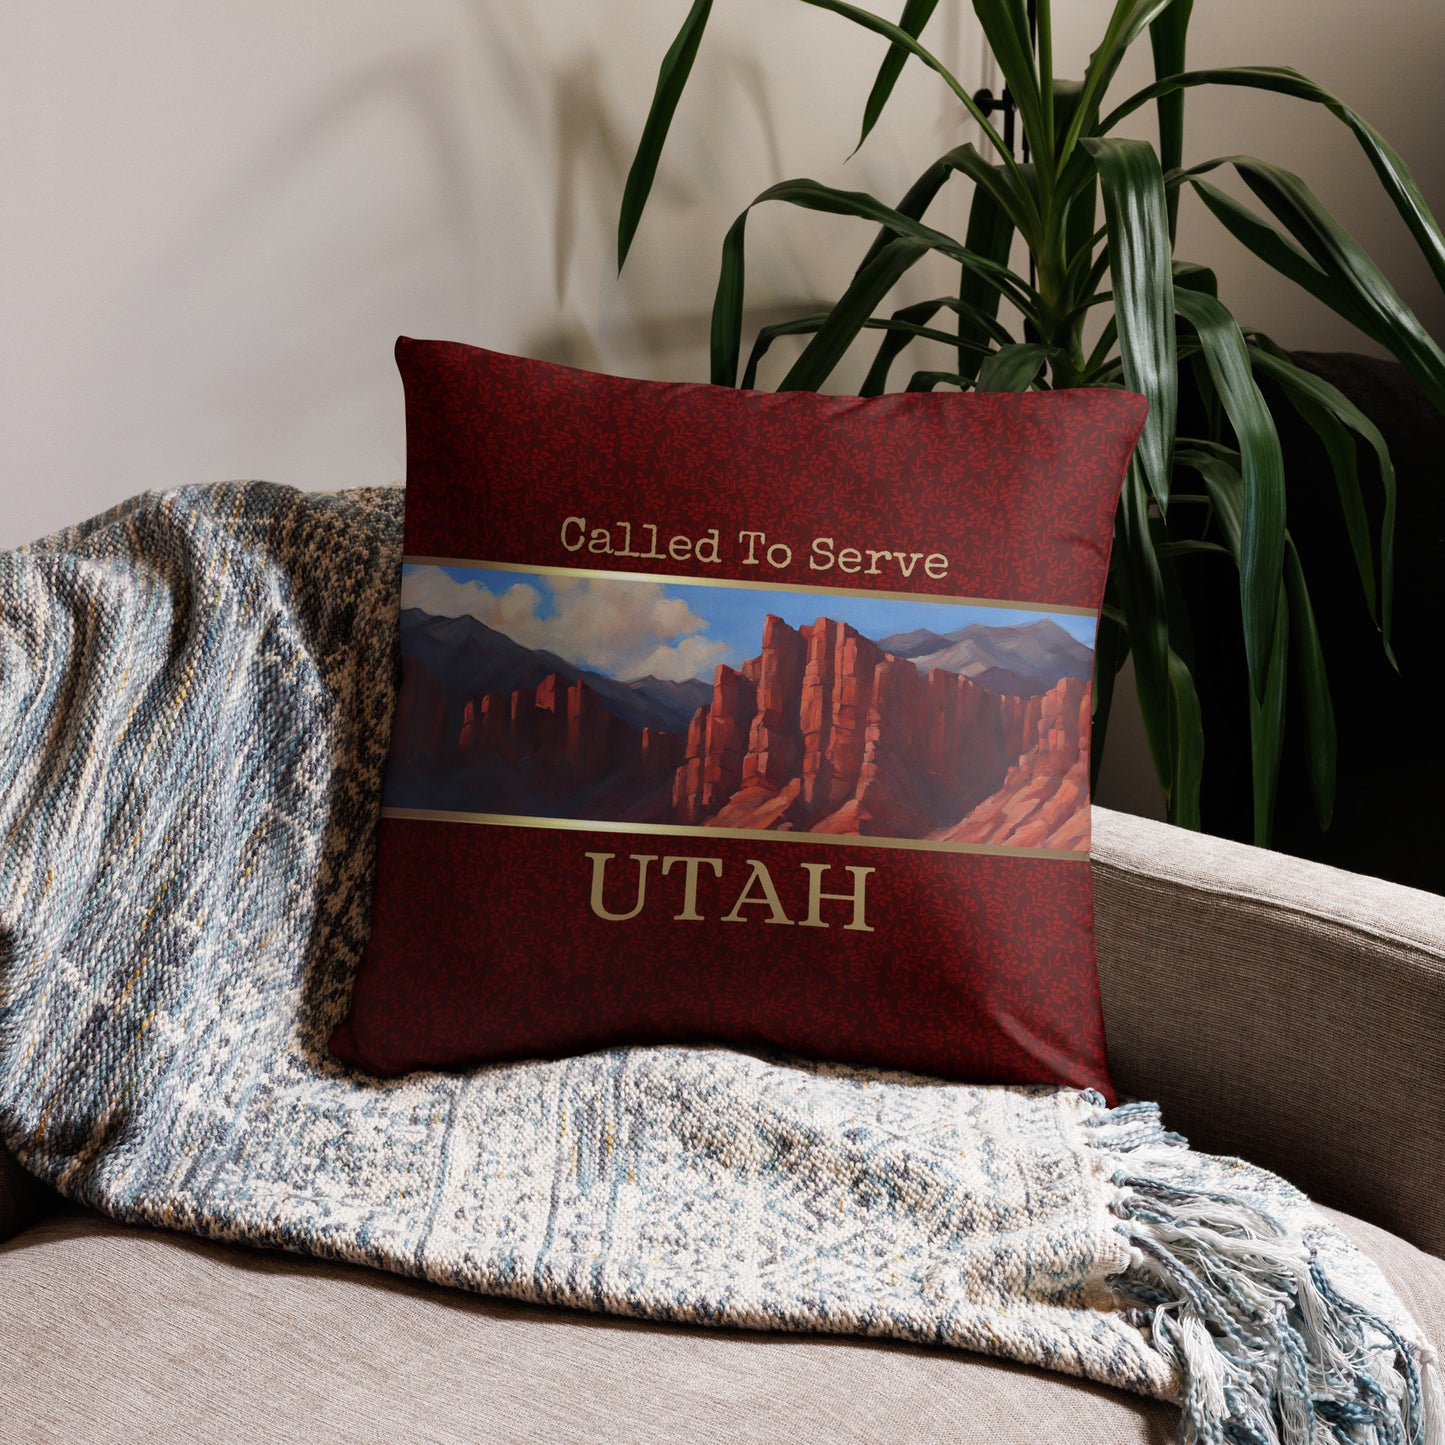 Utah Missionary Gift #3 | Best Missionary Gift Ideas | Mission Call Gifts | Called to Serve Gifts | Missionary Mom Gifts | Best Latter Day Saint Gifts | LDS Missionary Gifts | Utah Home Decor